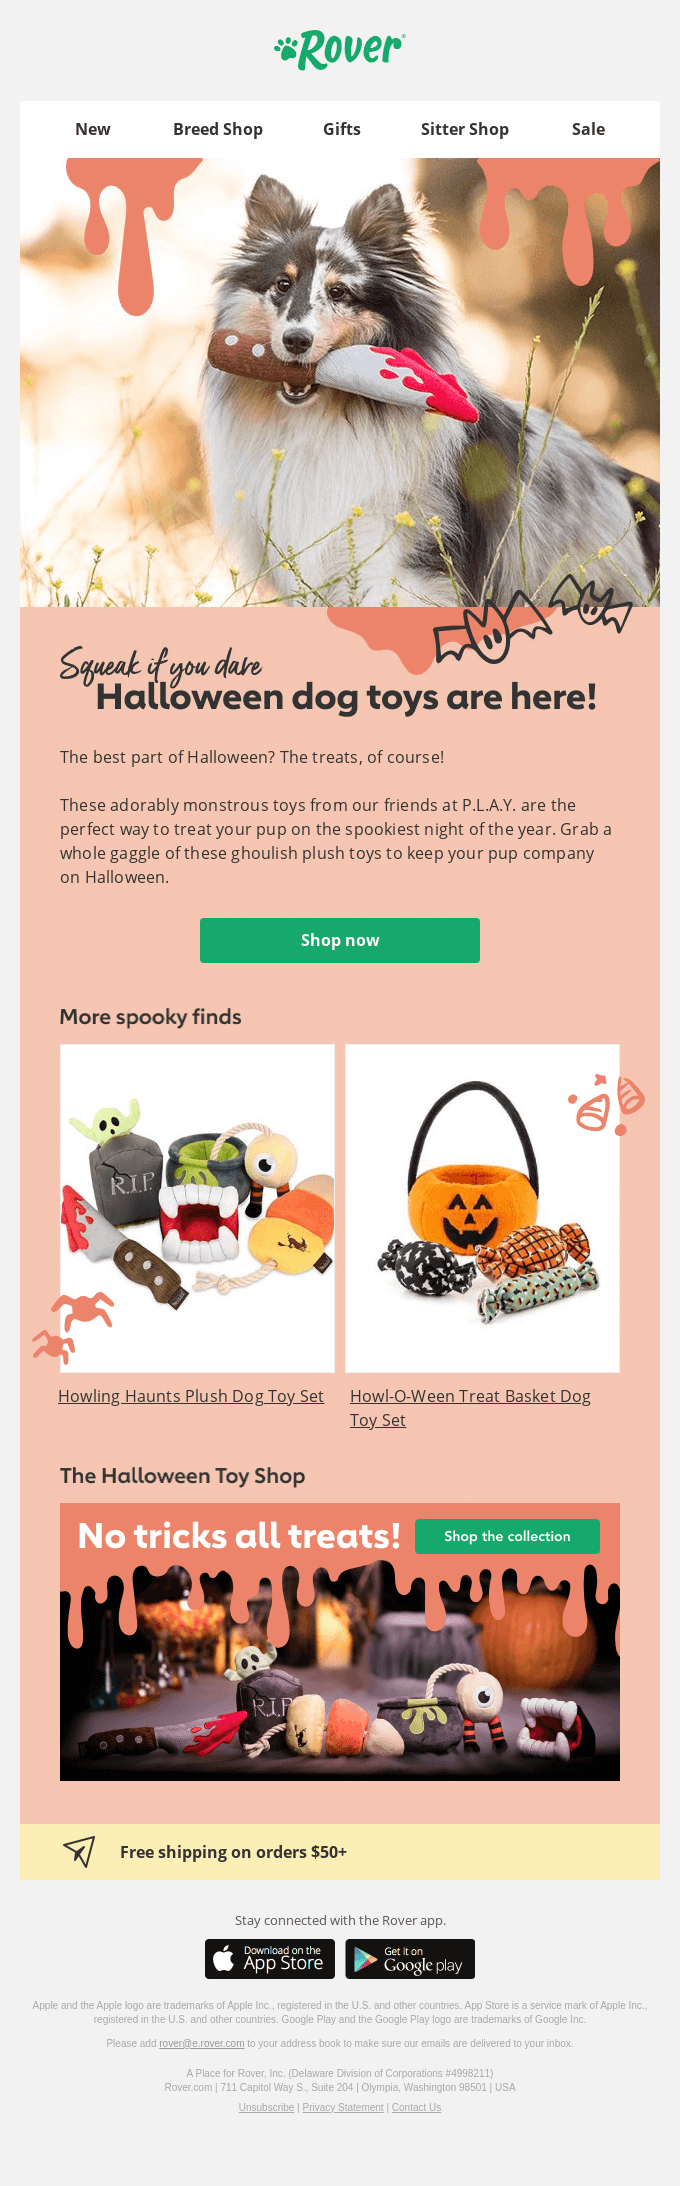 Petcare shop Rover had sent this beautifully crafted Halloween email